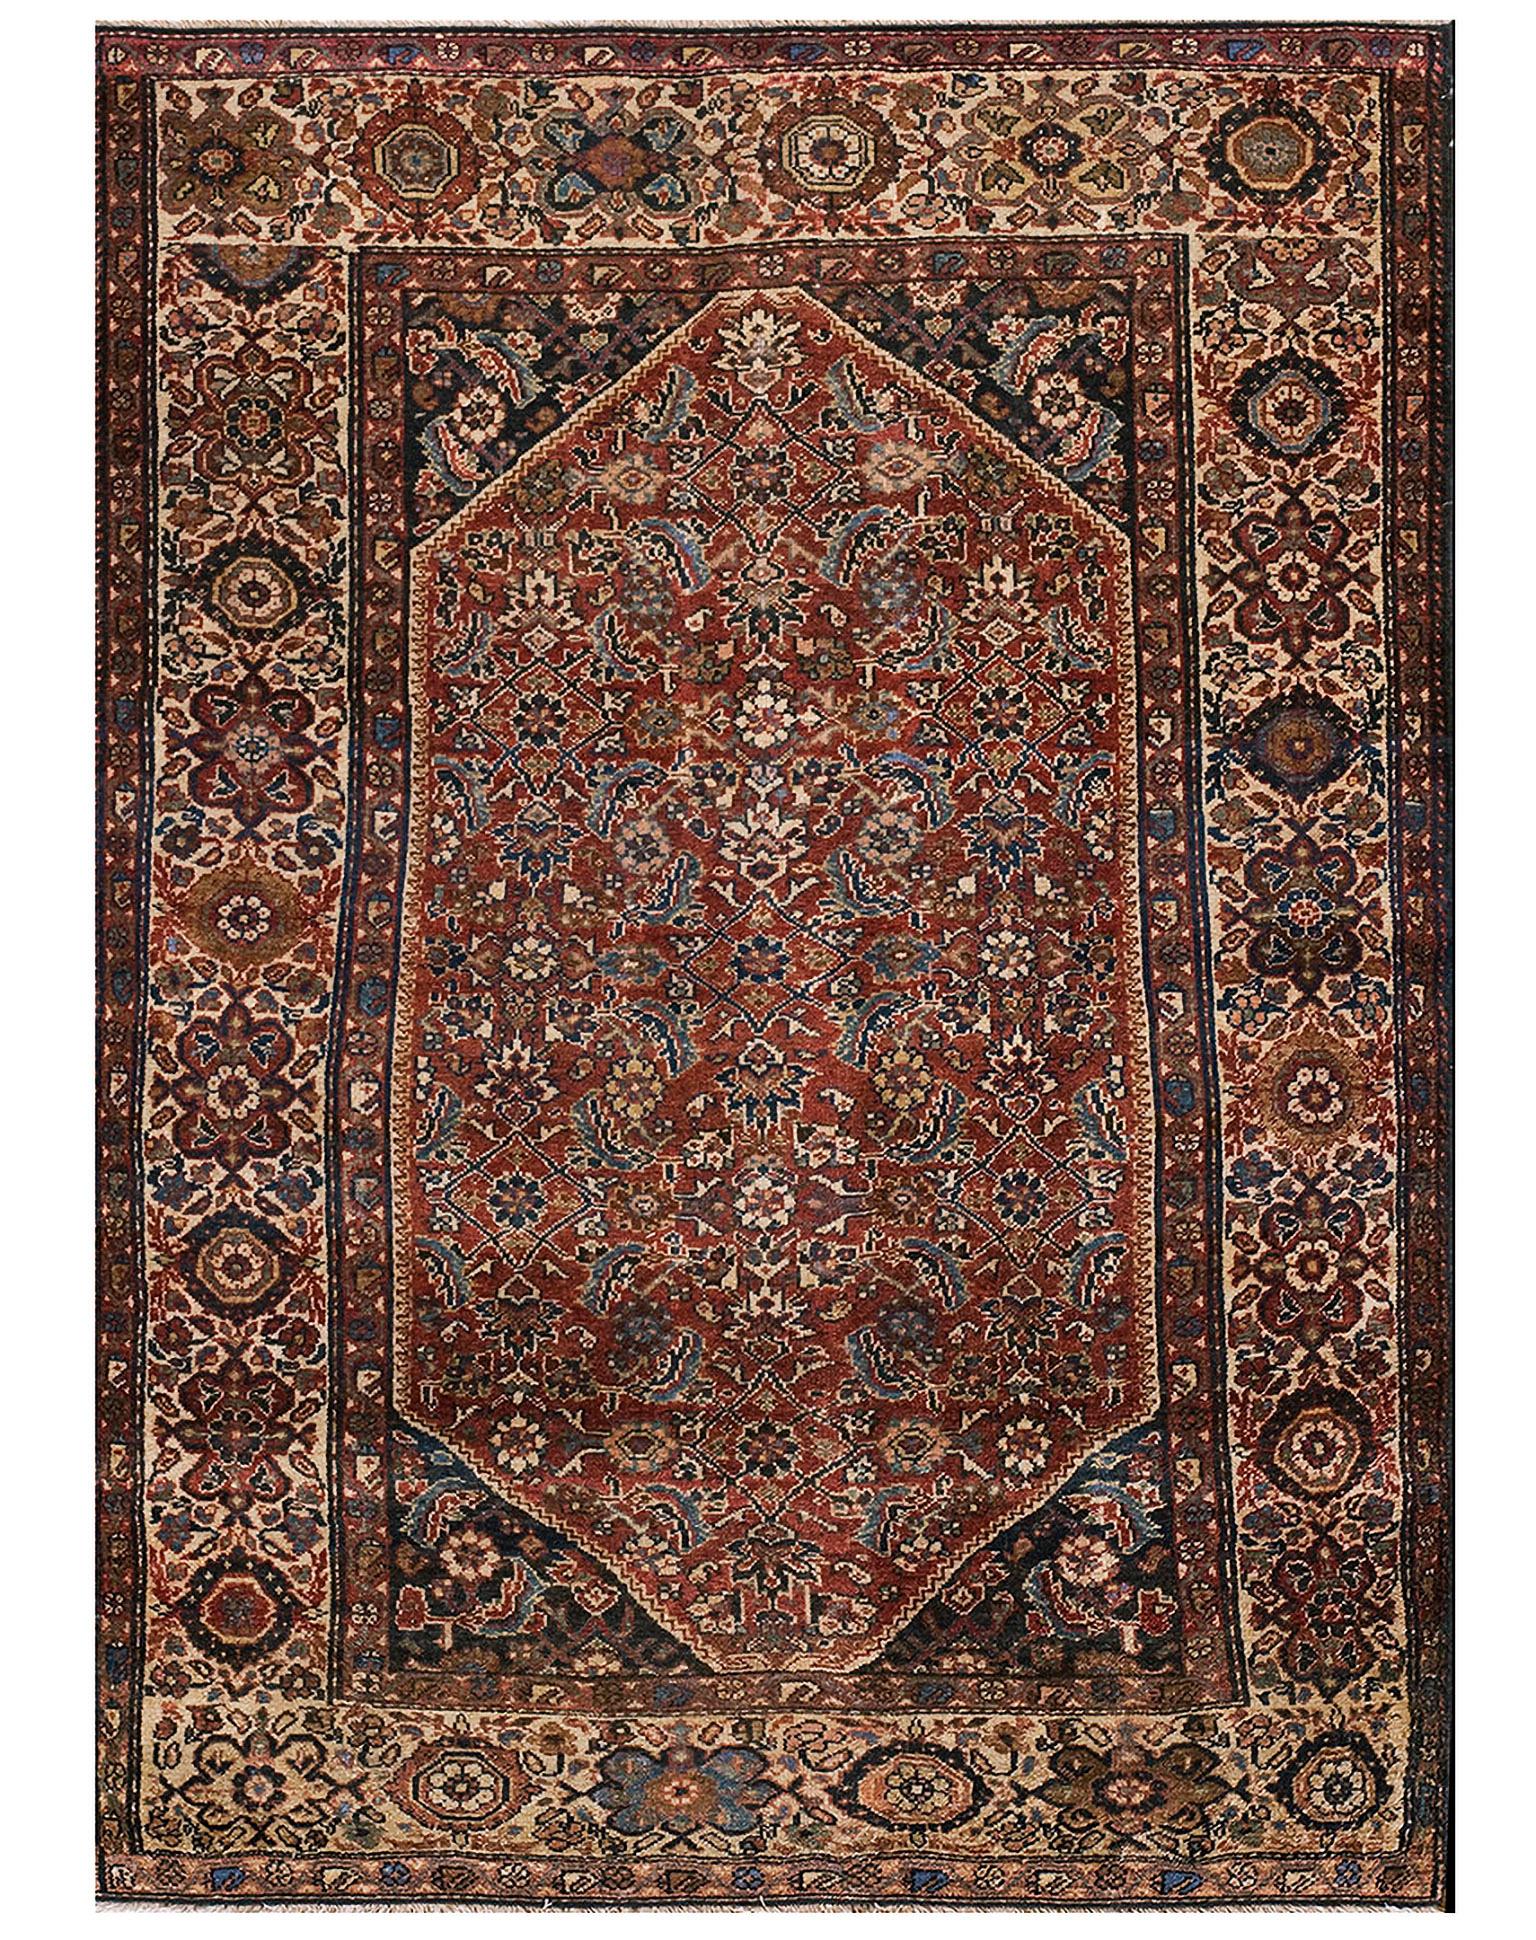 Early 20th Century Persian Malayer Carpet ( 4'3" x 6'2" - 130 x 188 ) For Sale